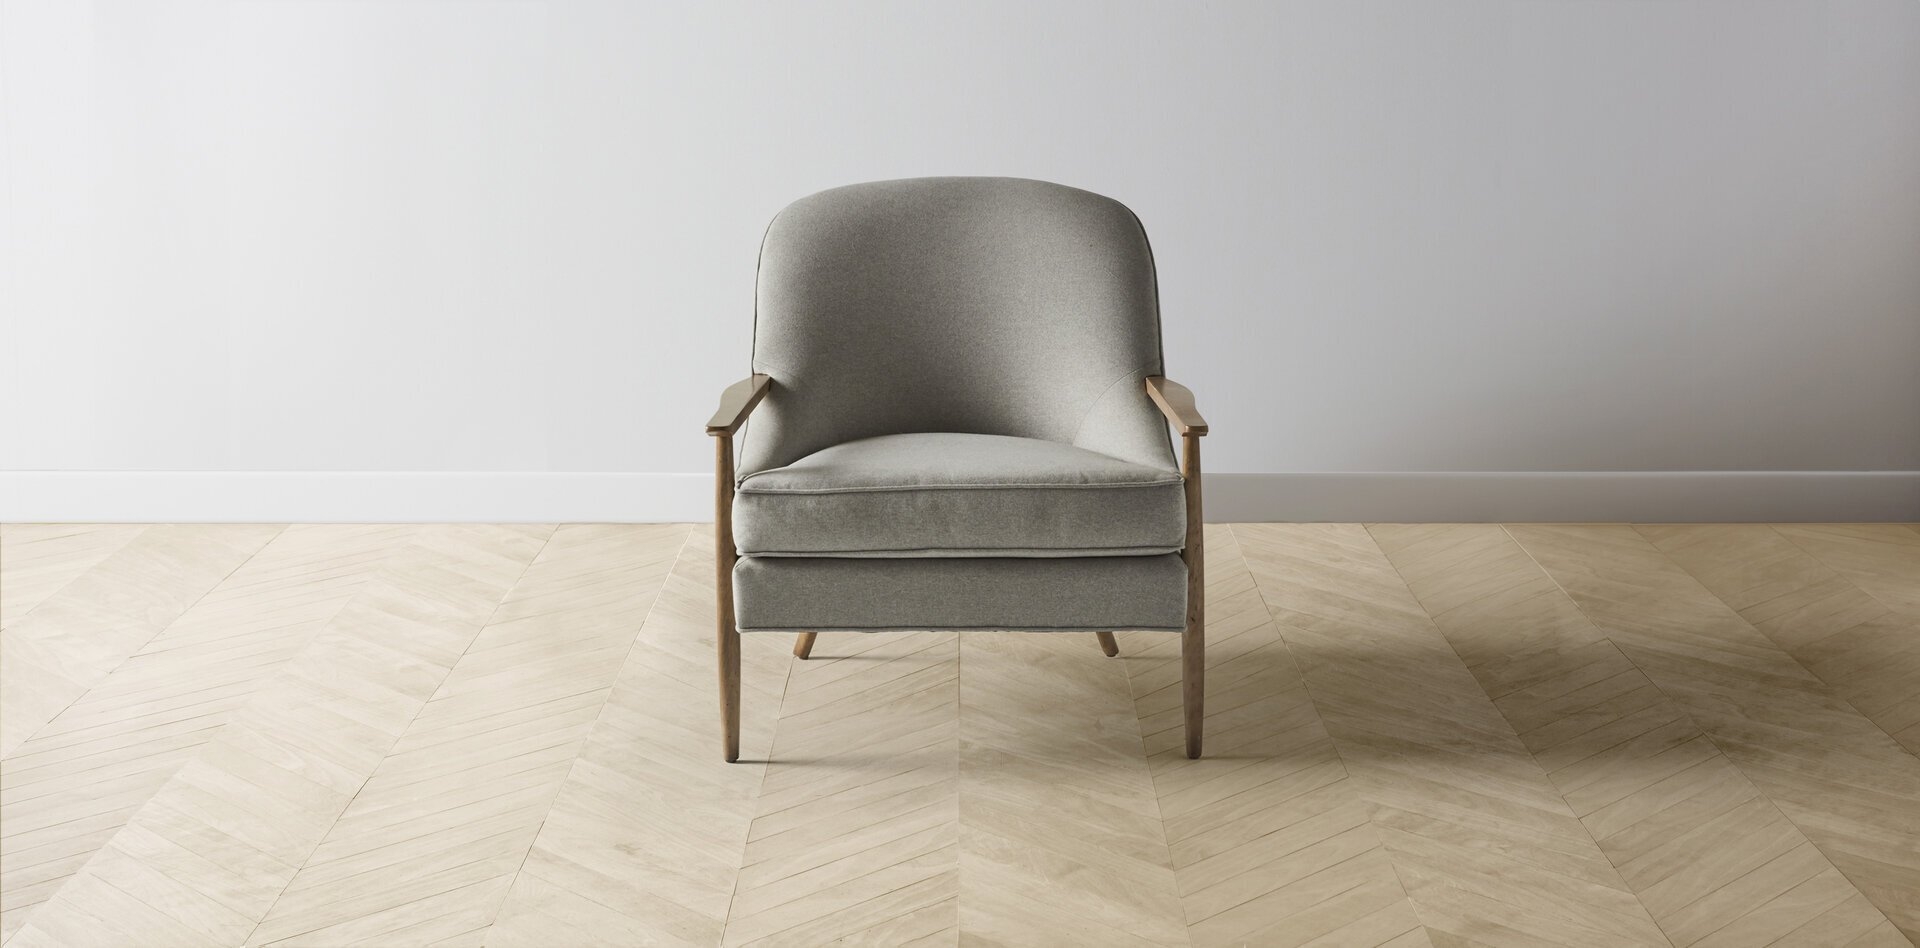 The Leroy - Chair - Image 3